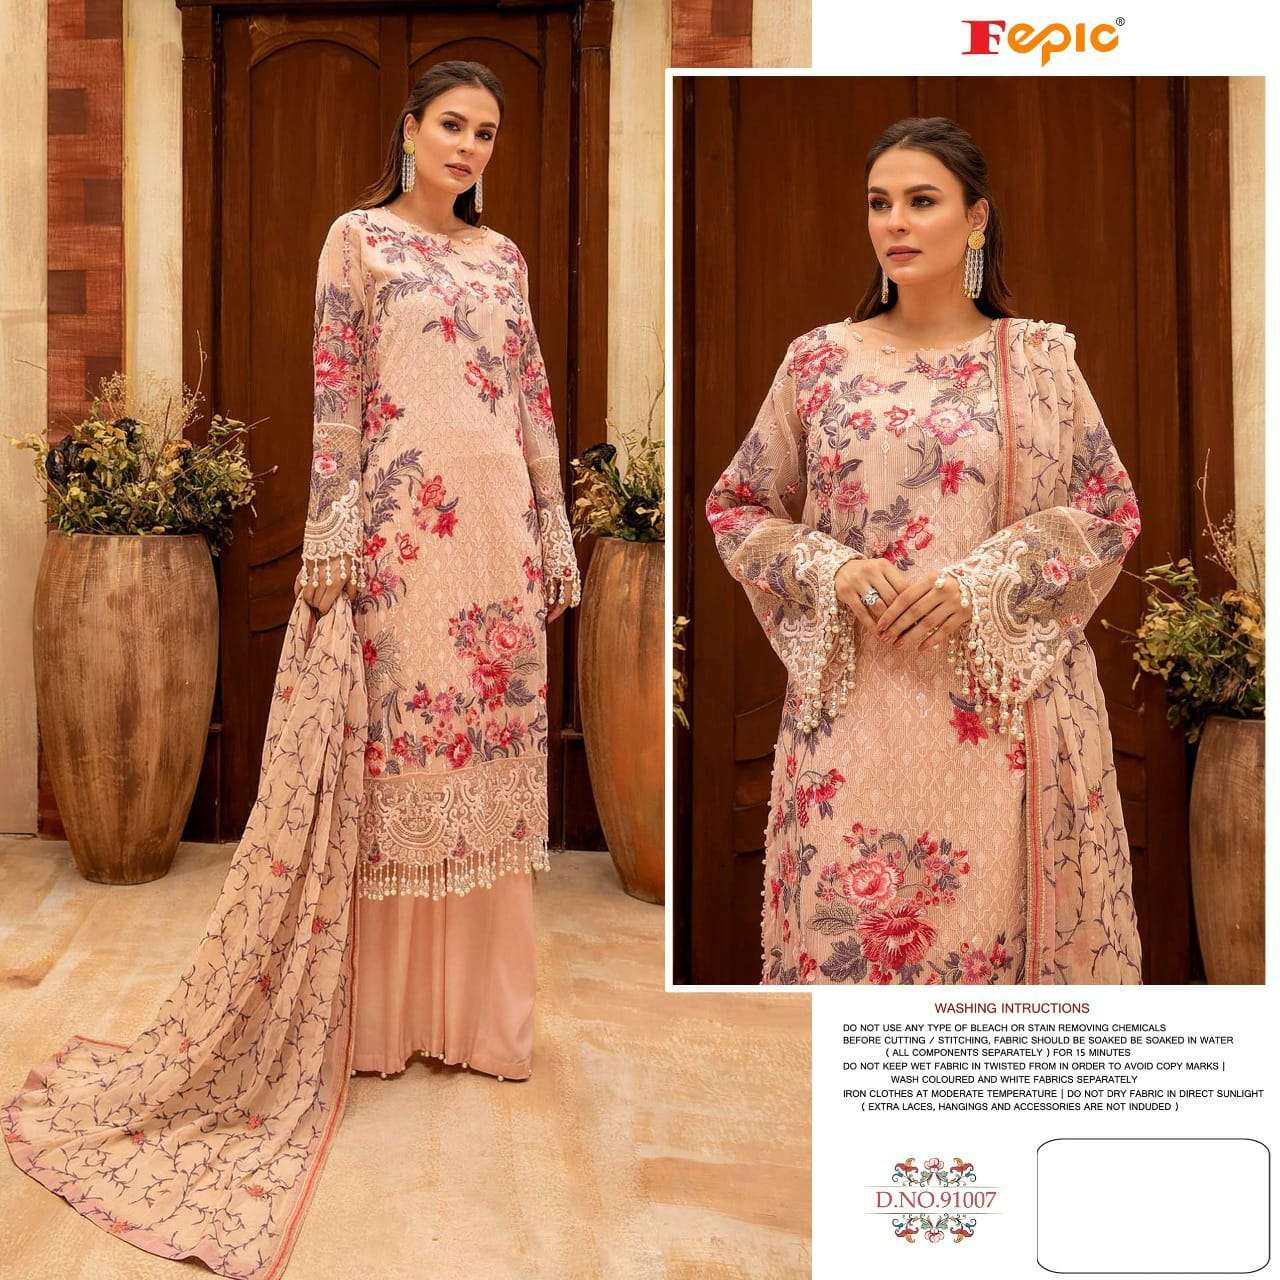 FEPIC ROSEMEEN D.NO 91007 DESIGNER GEORGETTE EMBROIDERY WORK AND HANDWORK SUITS PAKISTANI REPLICA SUITS IN SINGLES